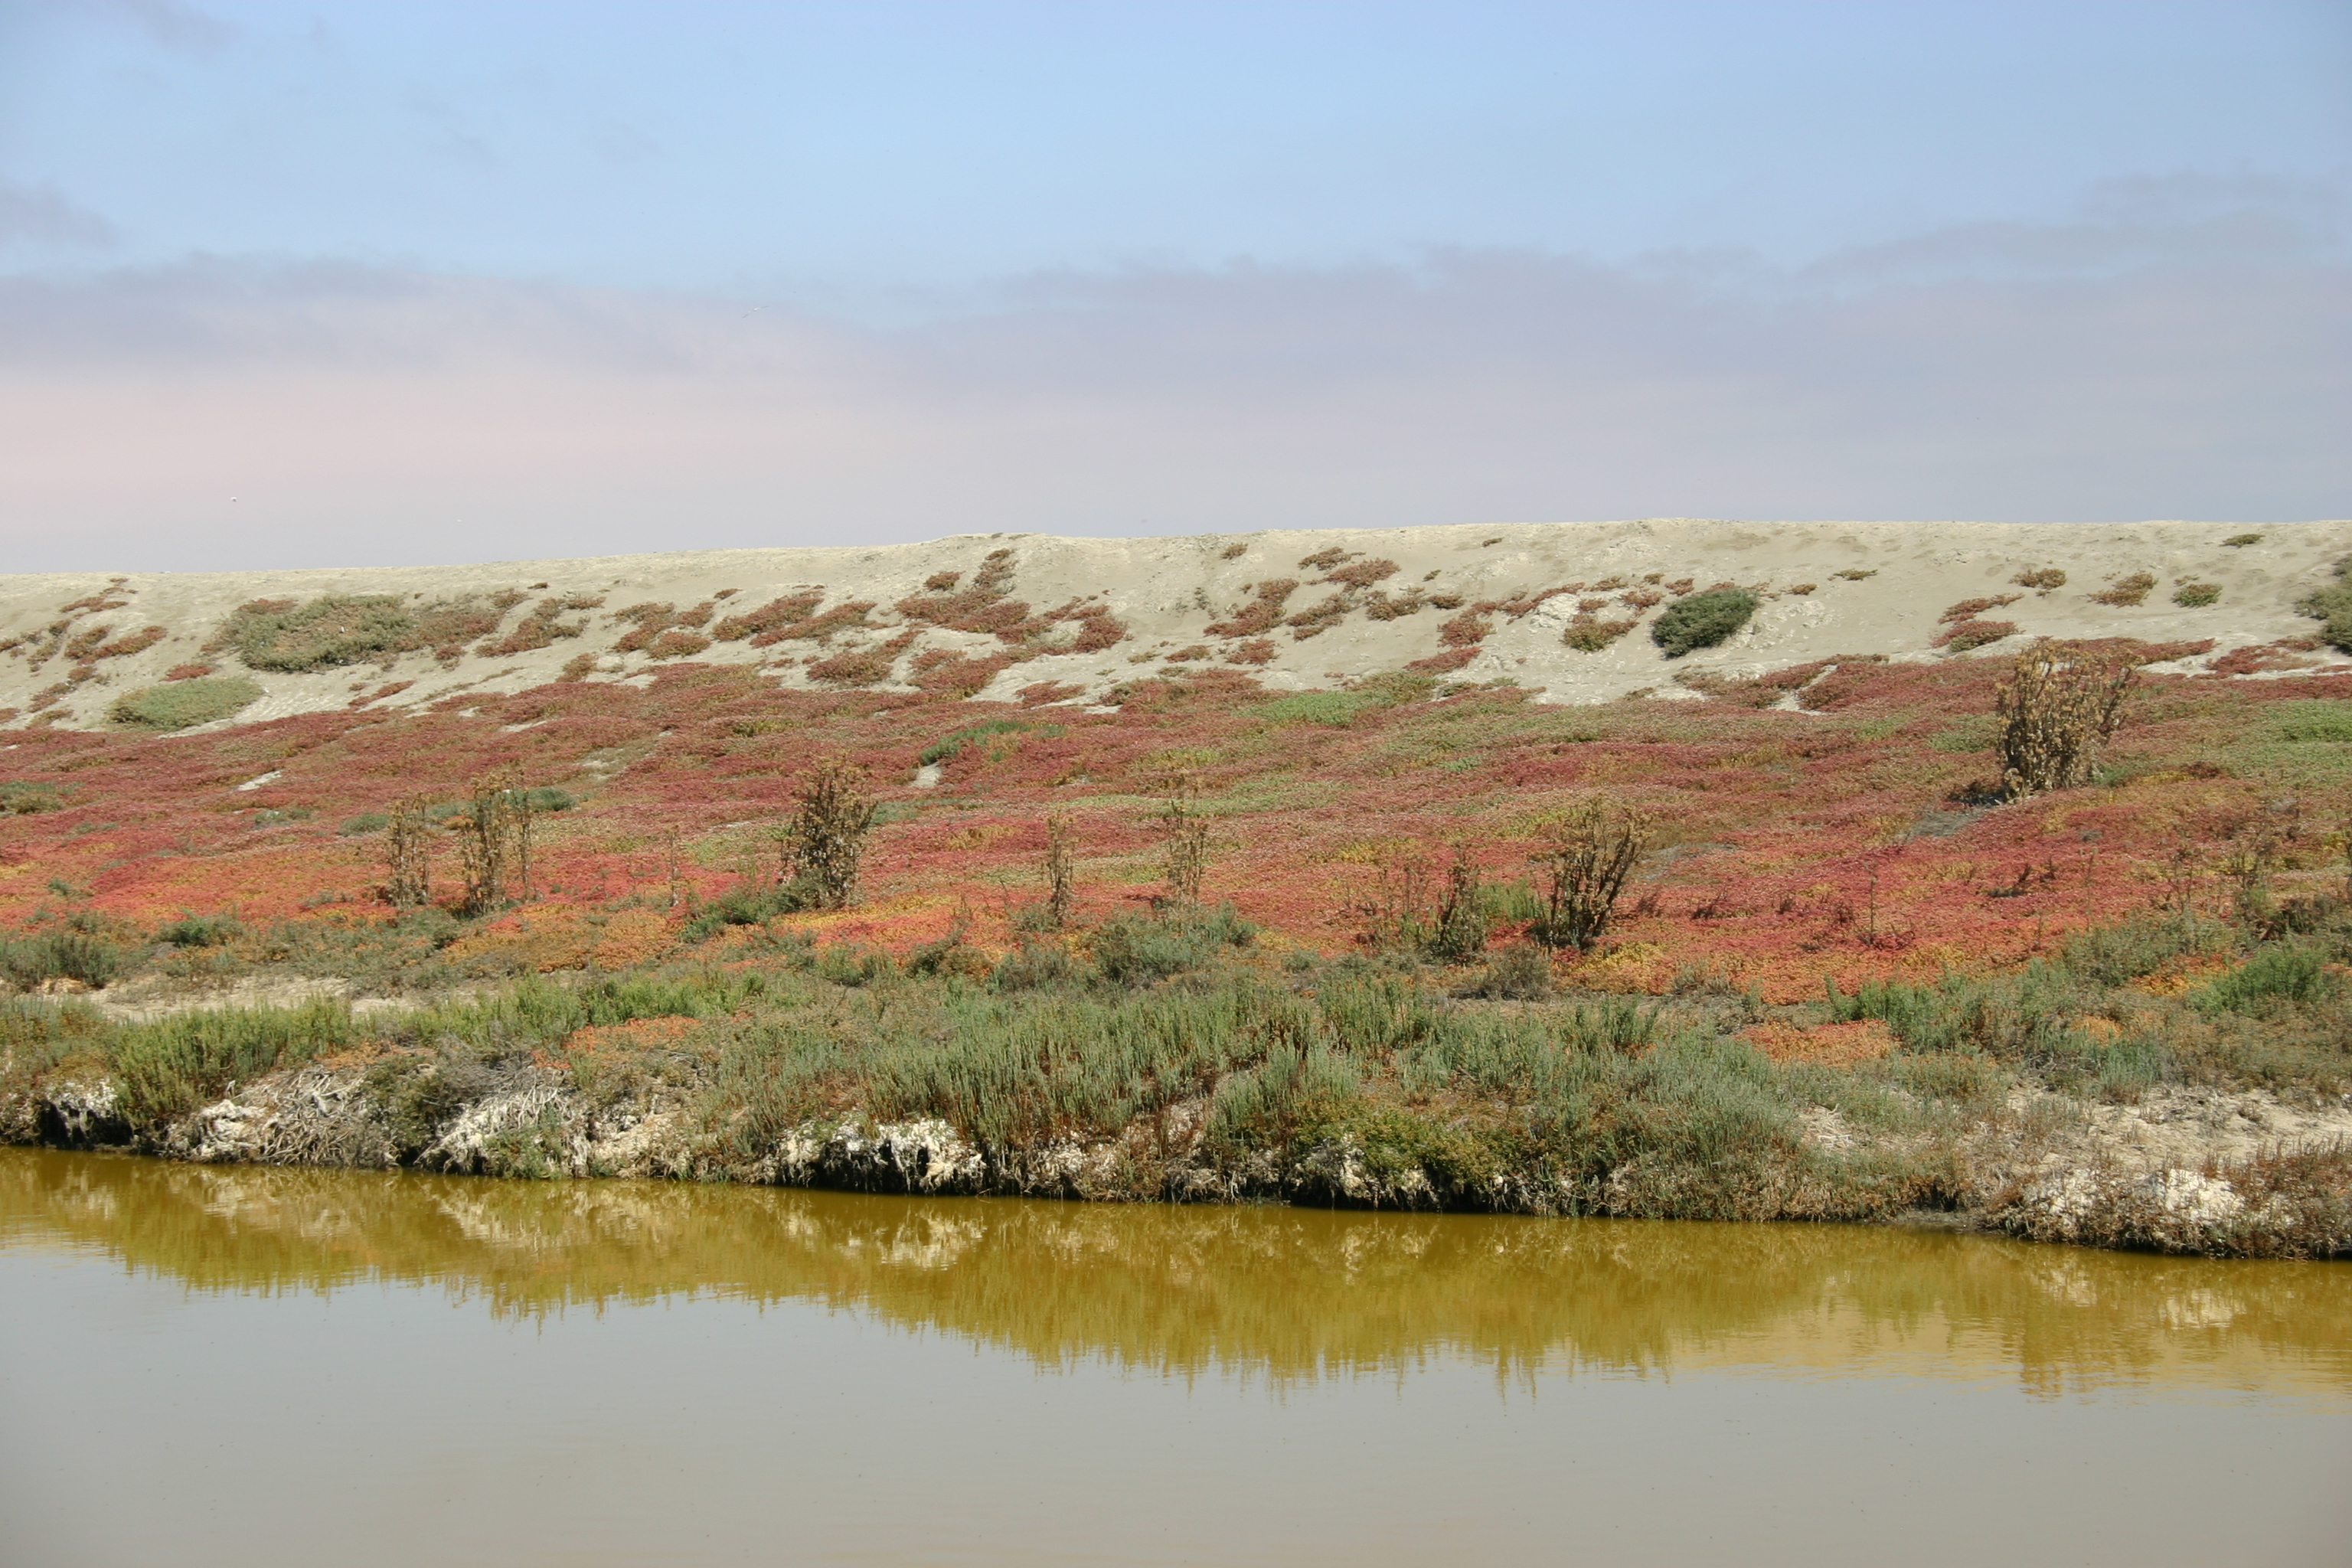 Colorful plants grow on the bank of the green waters of a salt marsh.